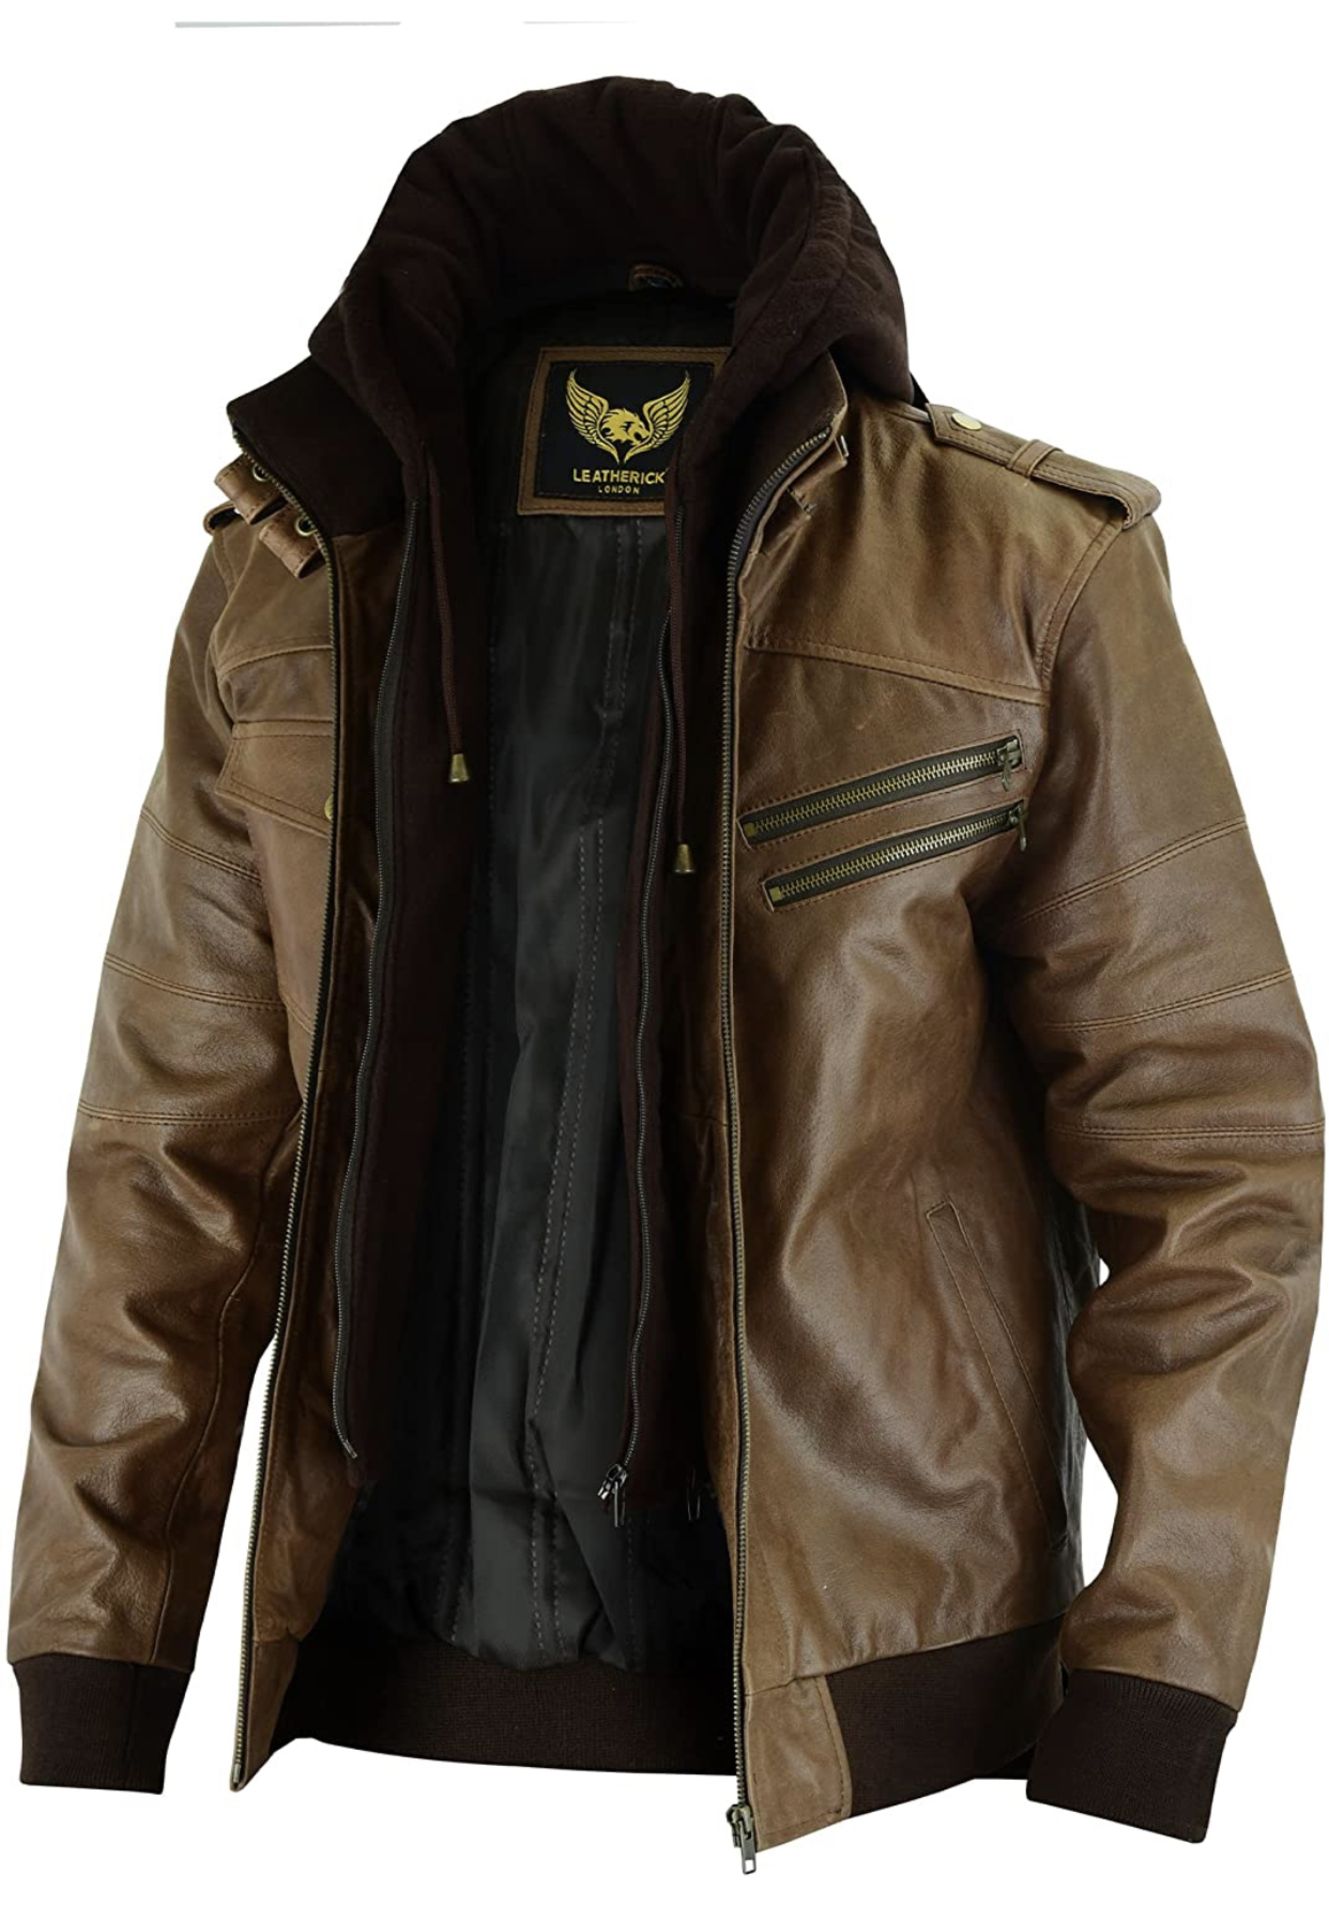 Leatherick Victor Men's Brown Leather Jacket, XL RRP £84.99